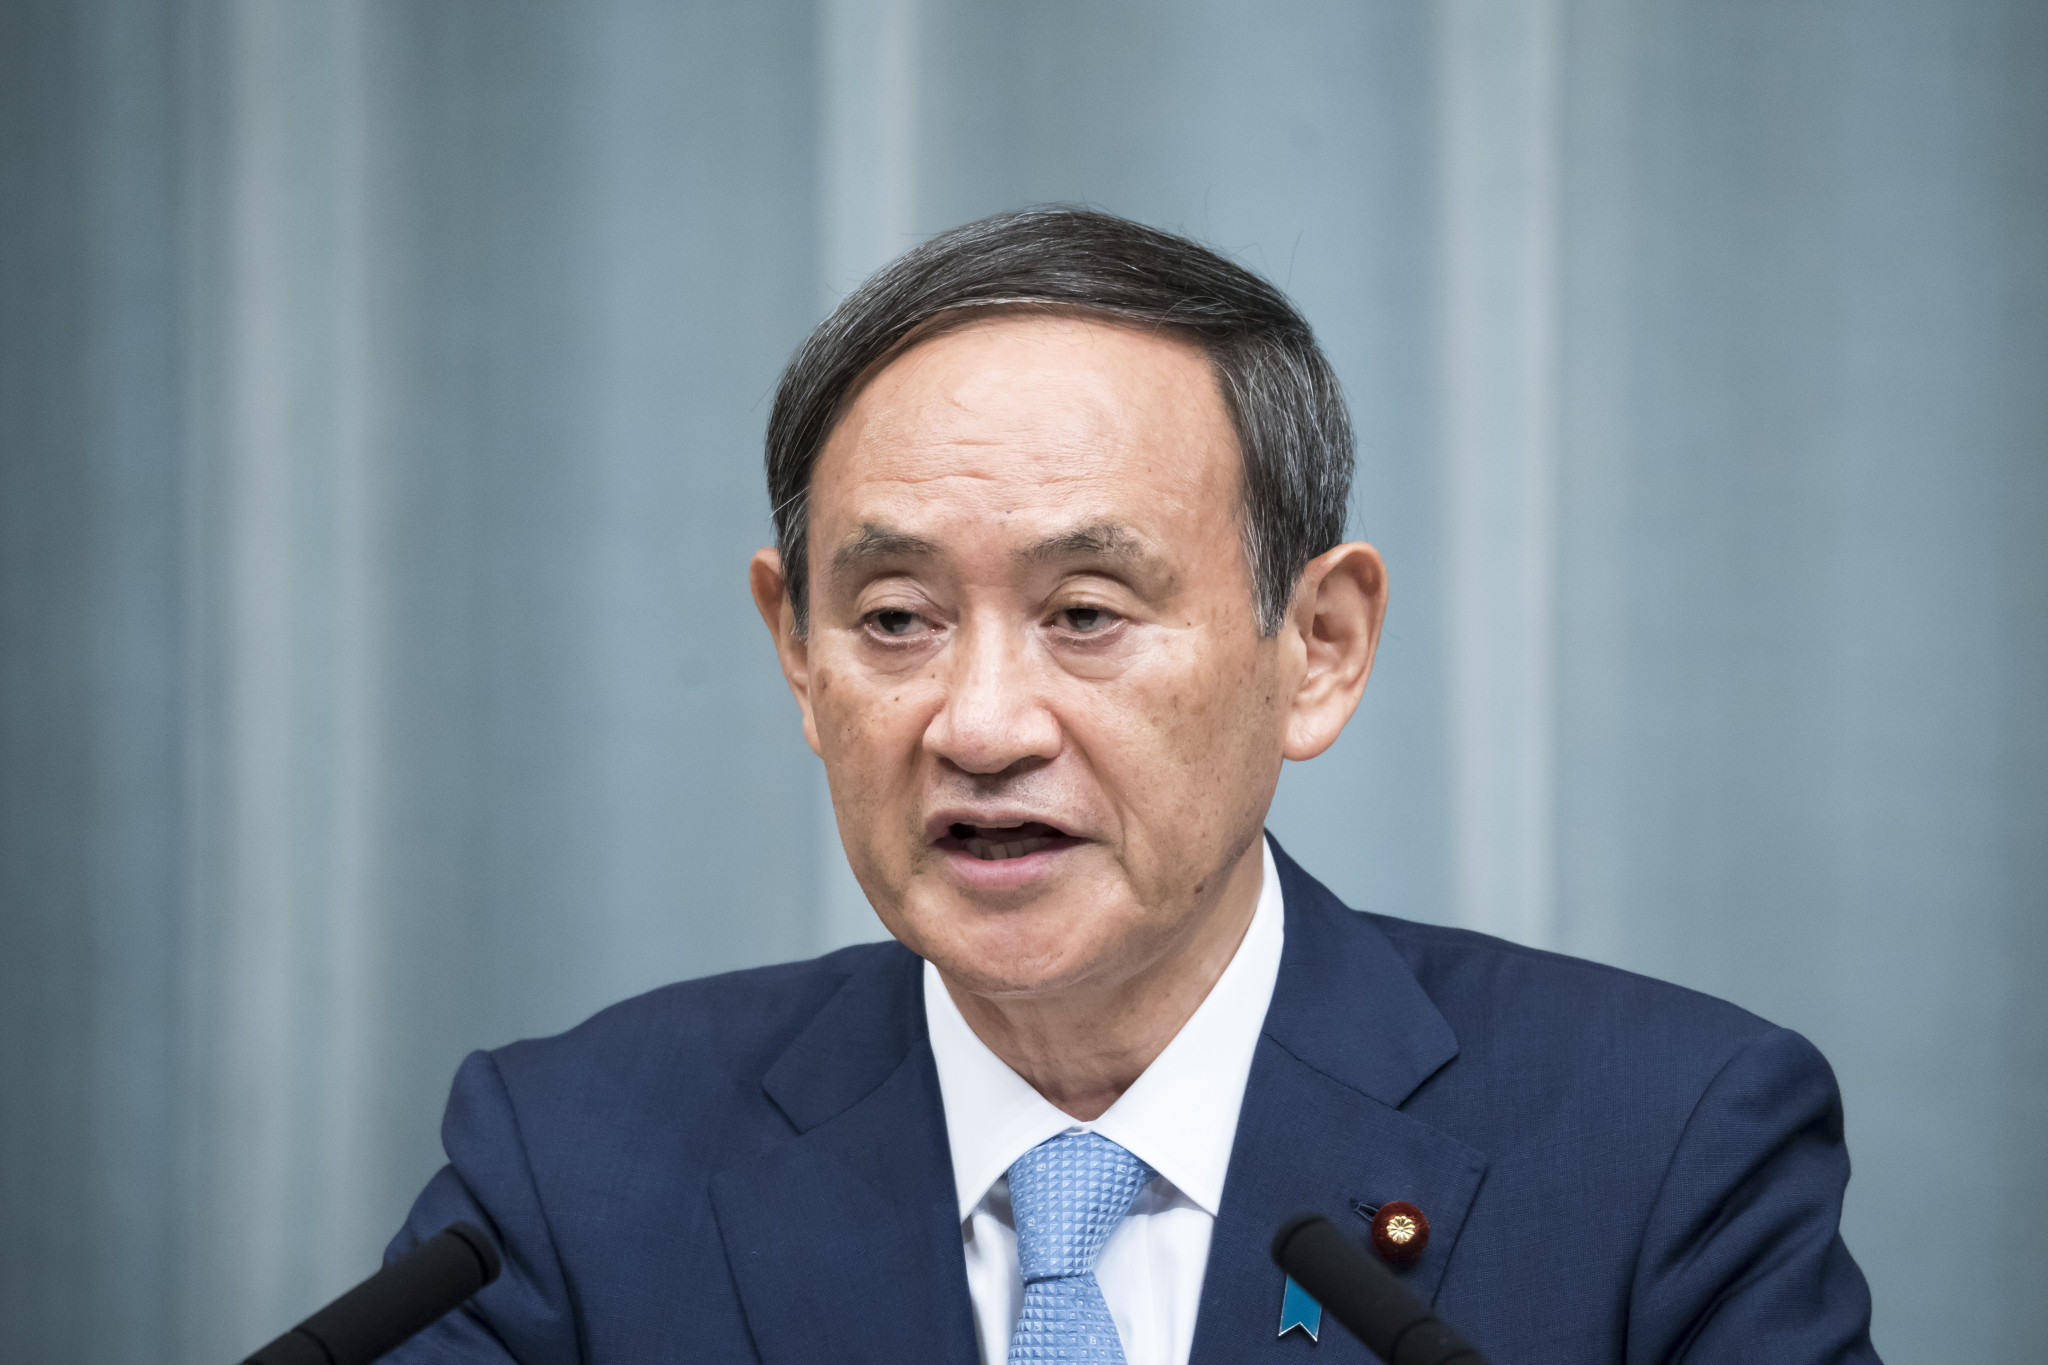 Japan's Chief Cabinet Secretary Yoshihide Suga has said Japan will continue to make preparations for Tokyo 2020 ©Getty Images